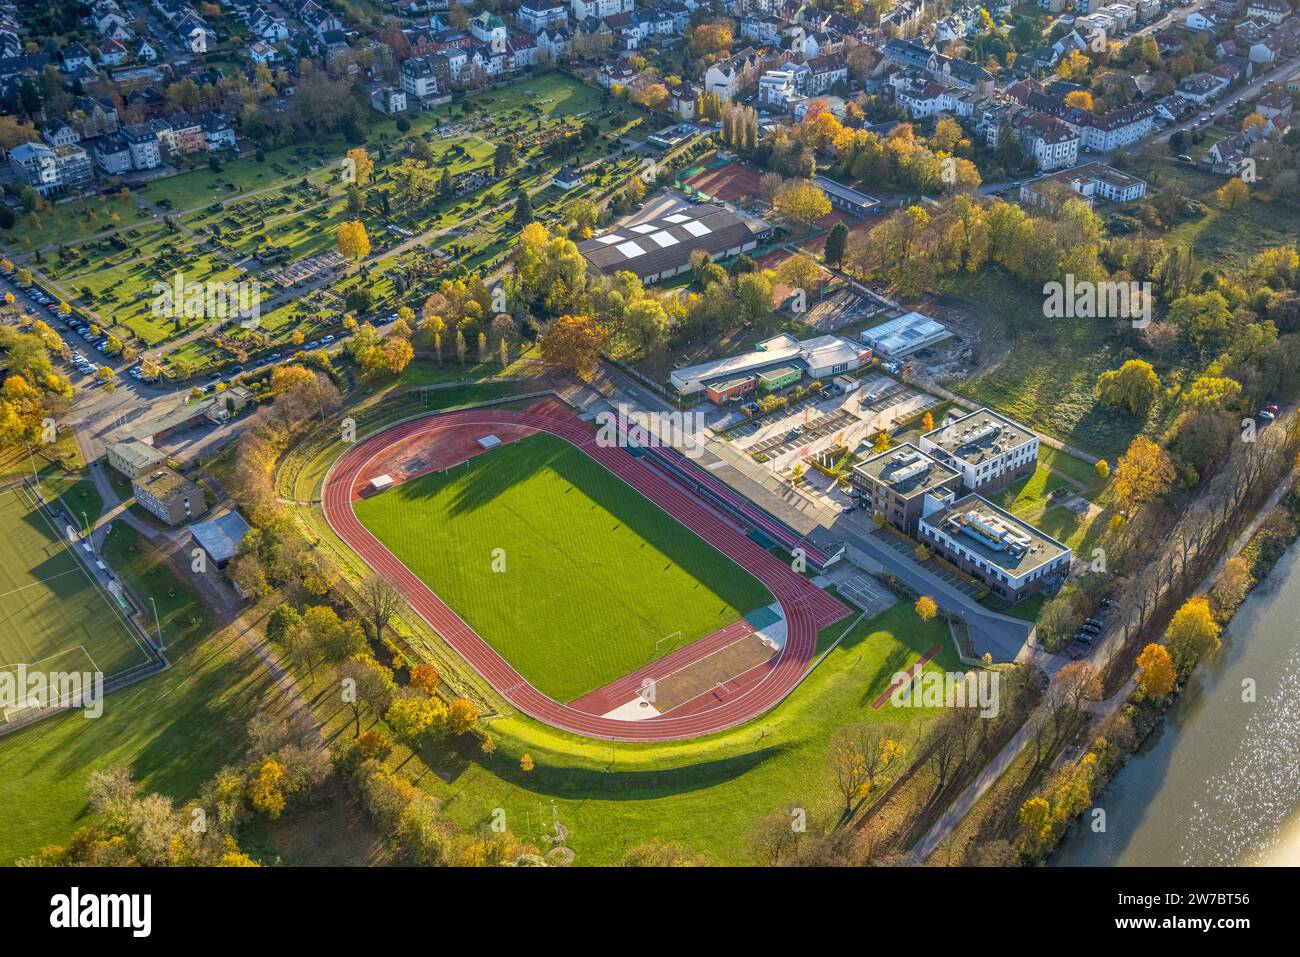 Aerial view, Jahnstadion, soccer pitch and athletics stadium, Reha Bad Hamm clinic, Ostenfriedhof cemetery and Jewish cemetery burial ground, Tus Kita Stock Photo